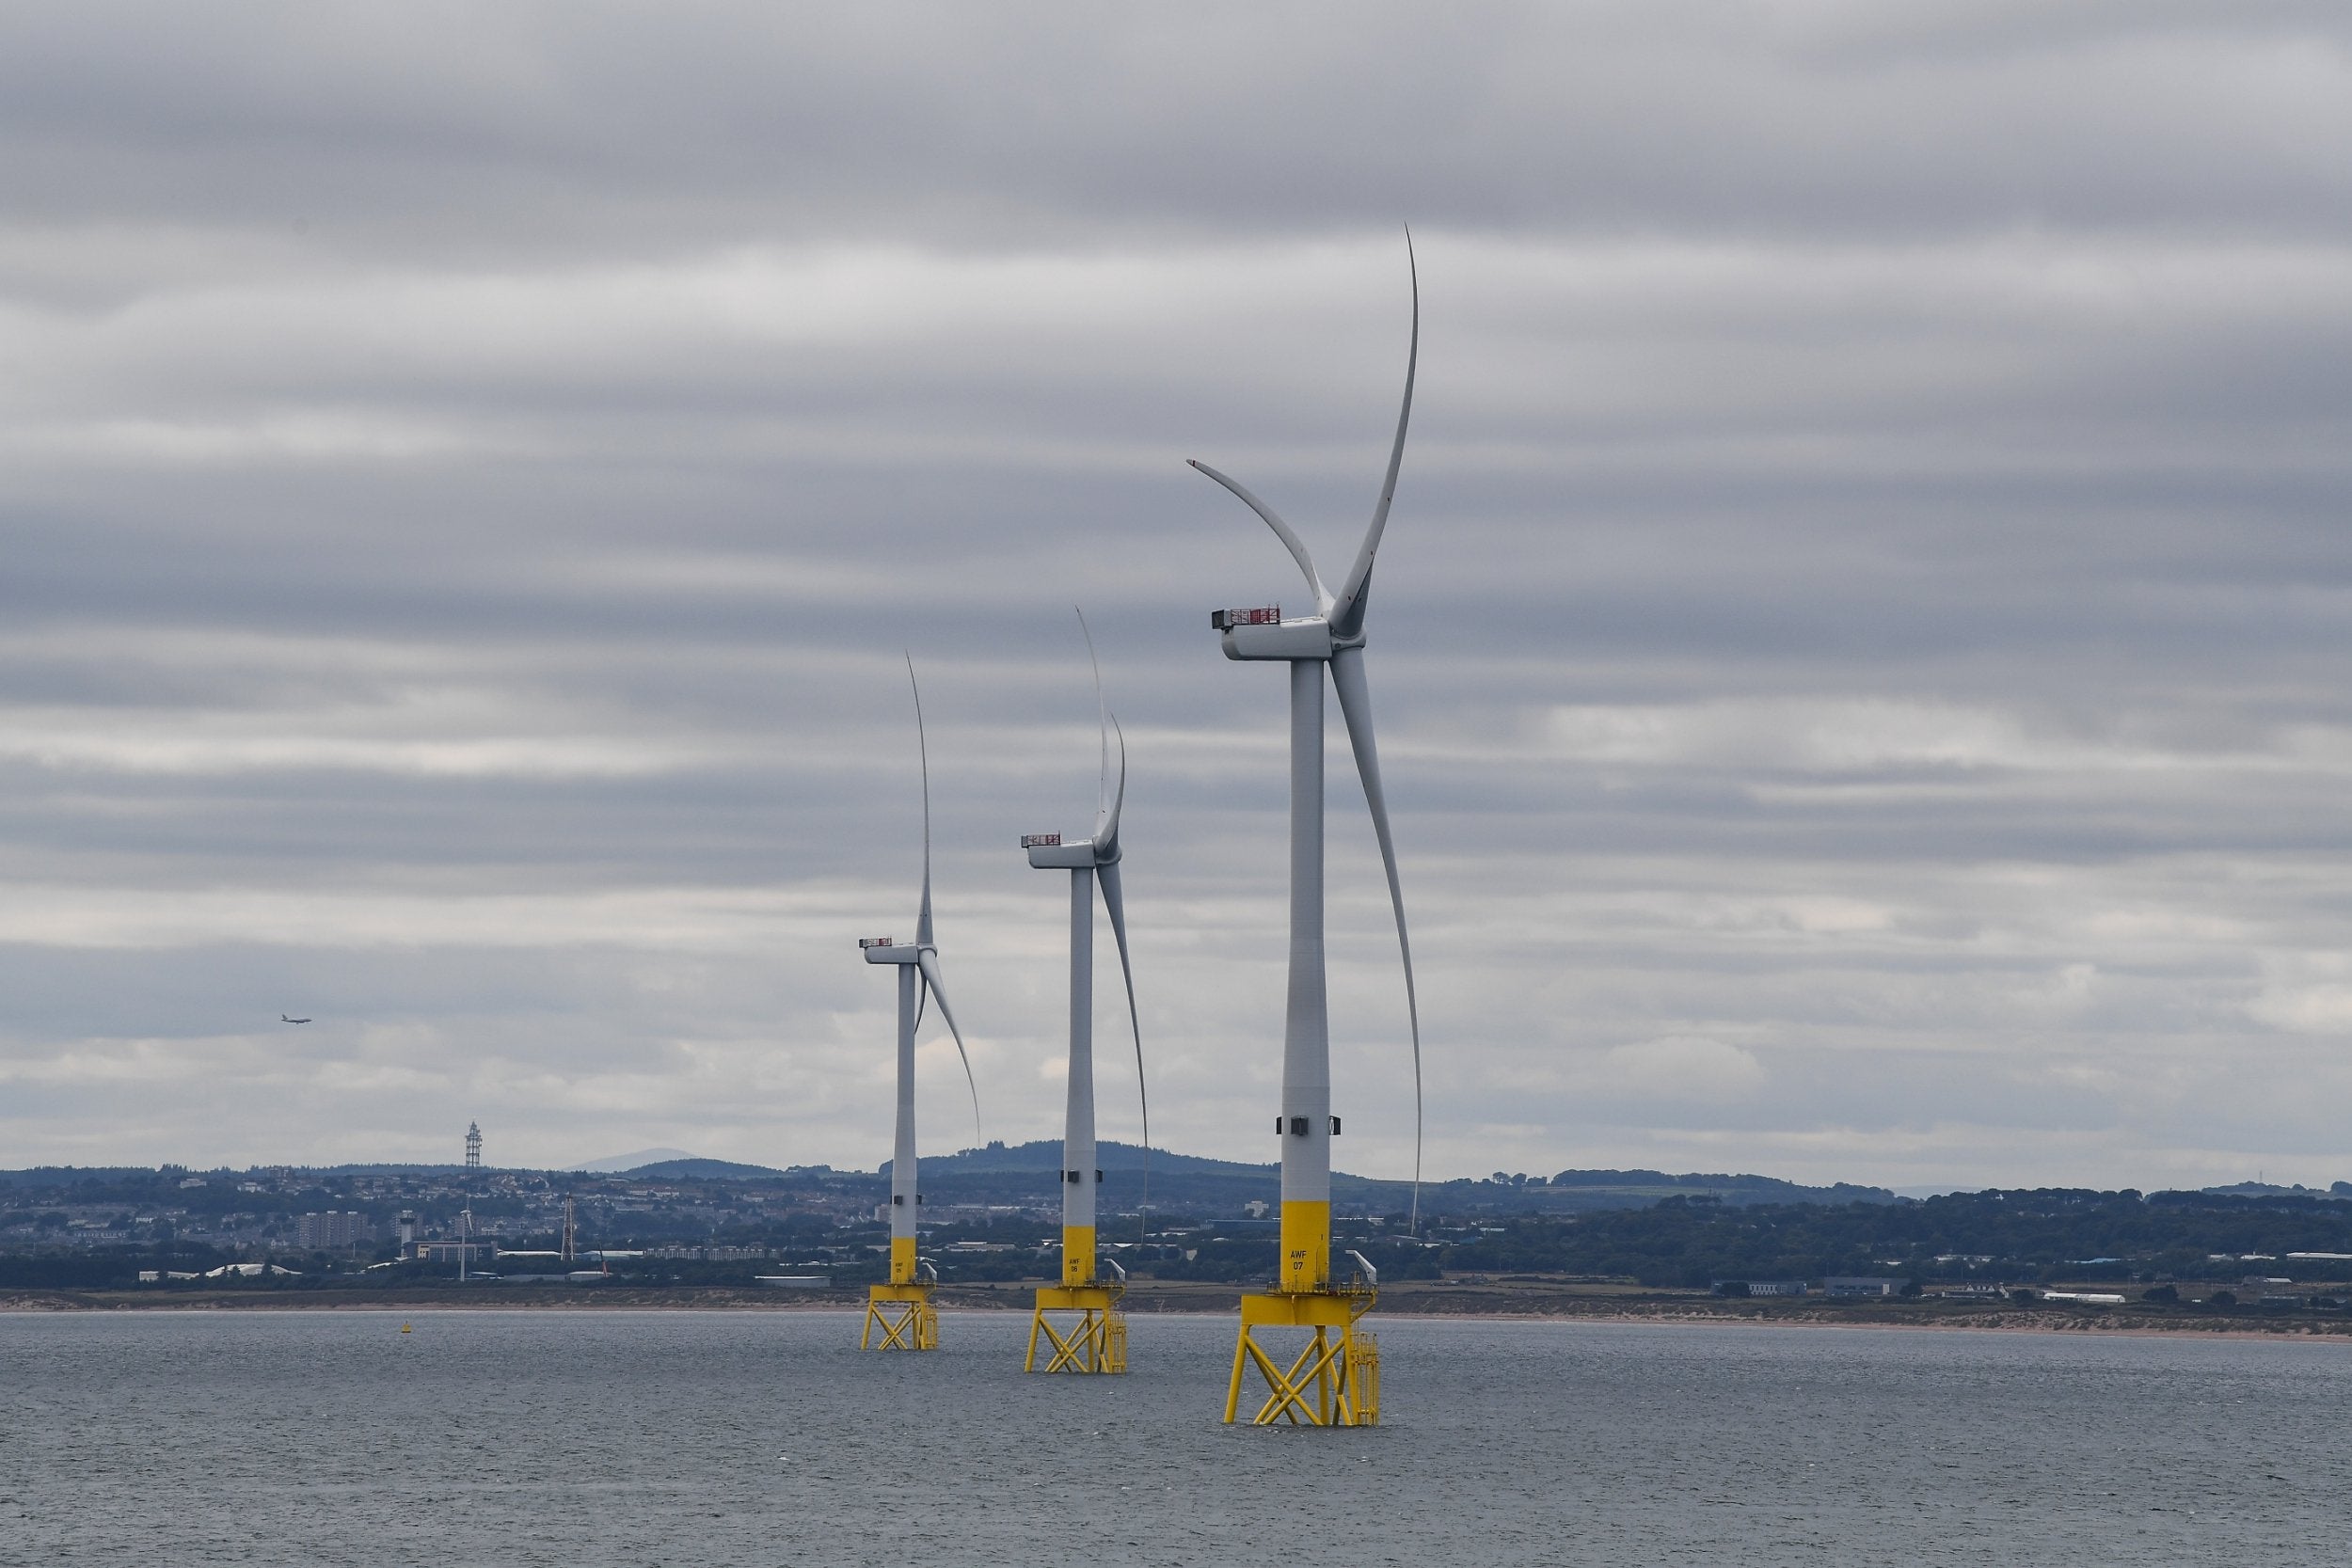 The UK is already considered a 'world leader' in offshore wind generation